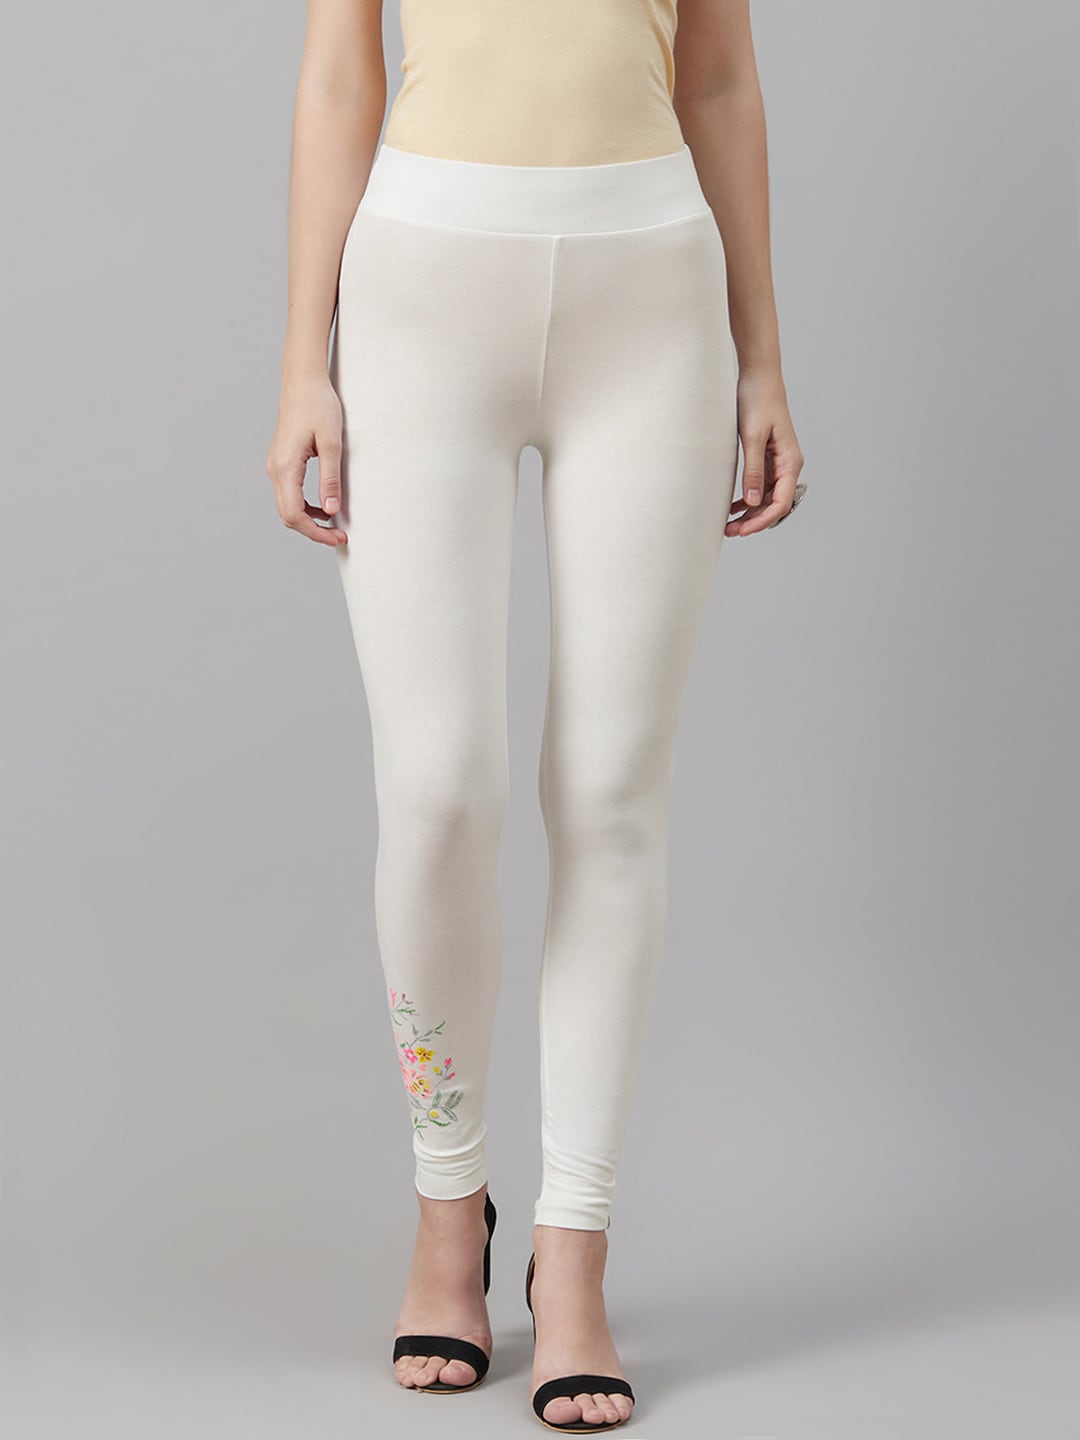 Biba Women White Solid Ankle Length Leggings with Floral Print Detail Price in India